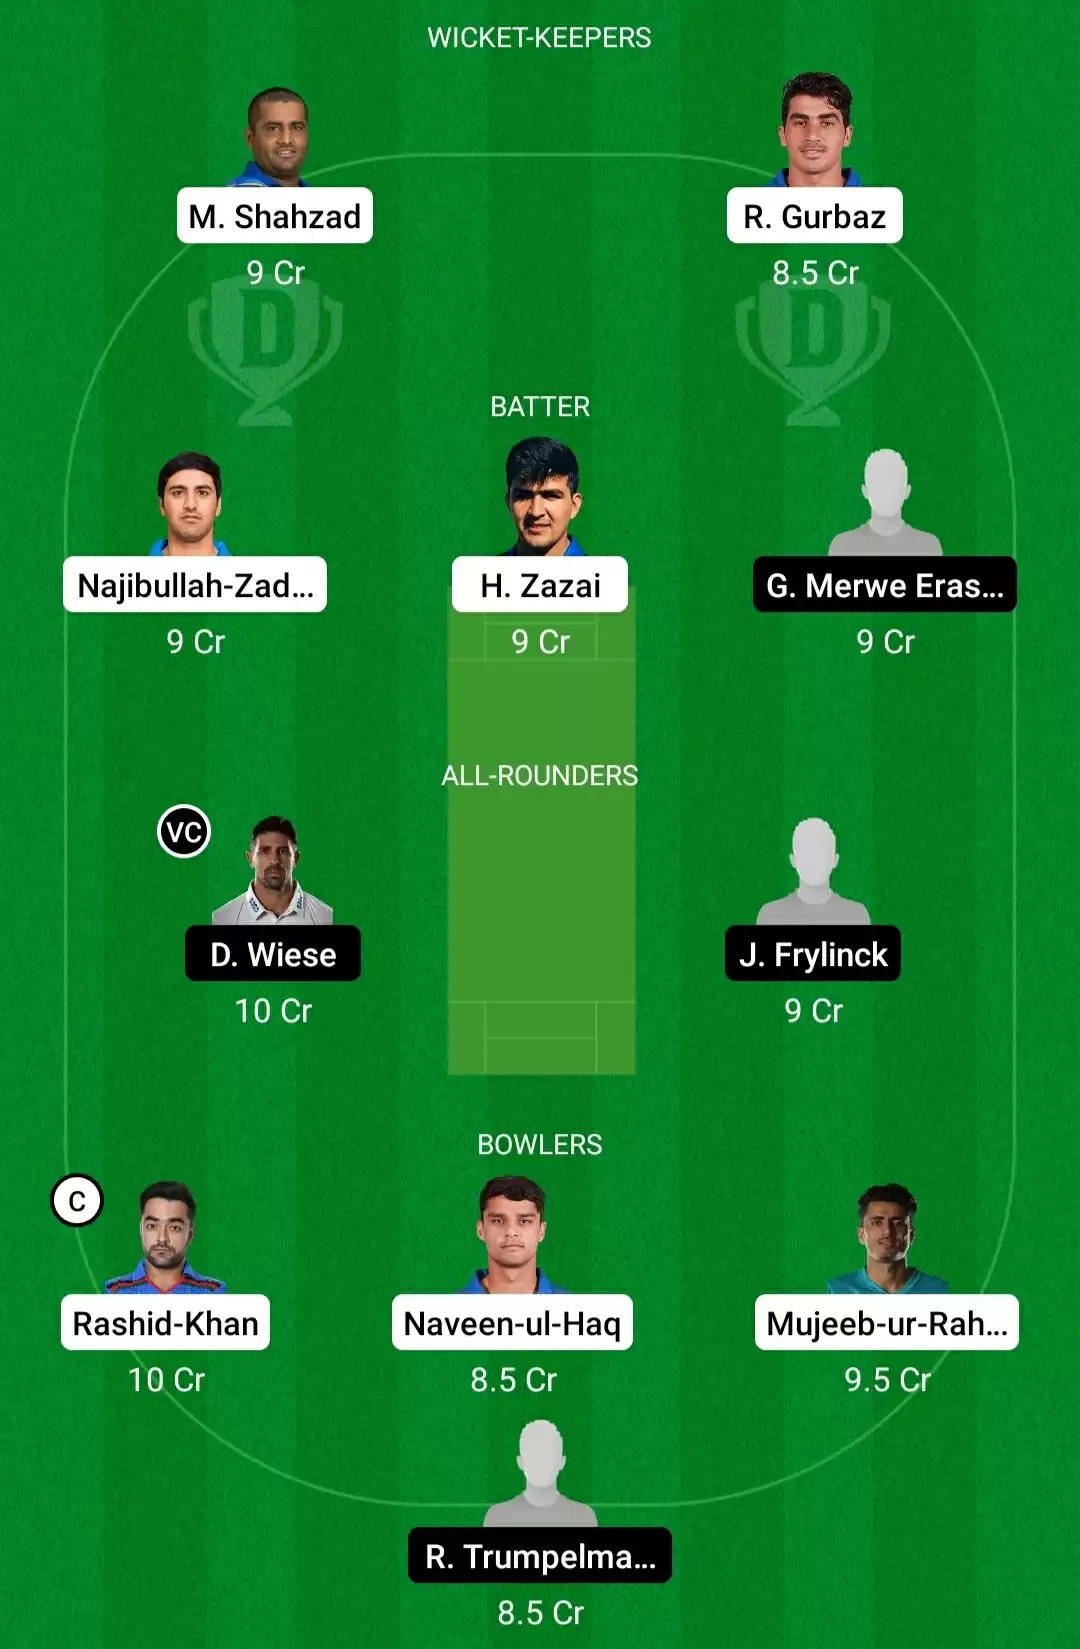 AFG vs NAM Dream11 Prediction for T20 World Cup 2021: Playing XI, Fantasy Cricket Tips, Team, Weather Updates and Pitch Report